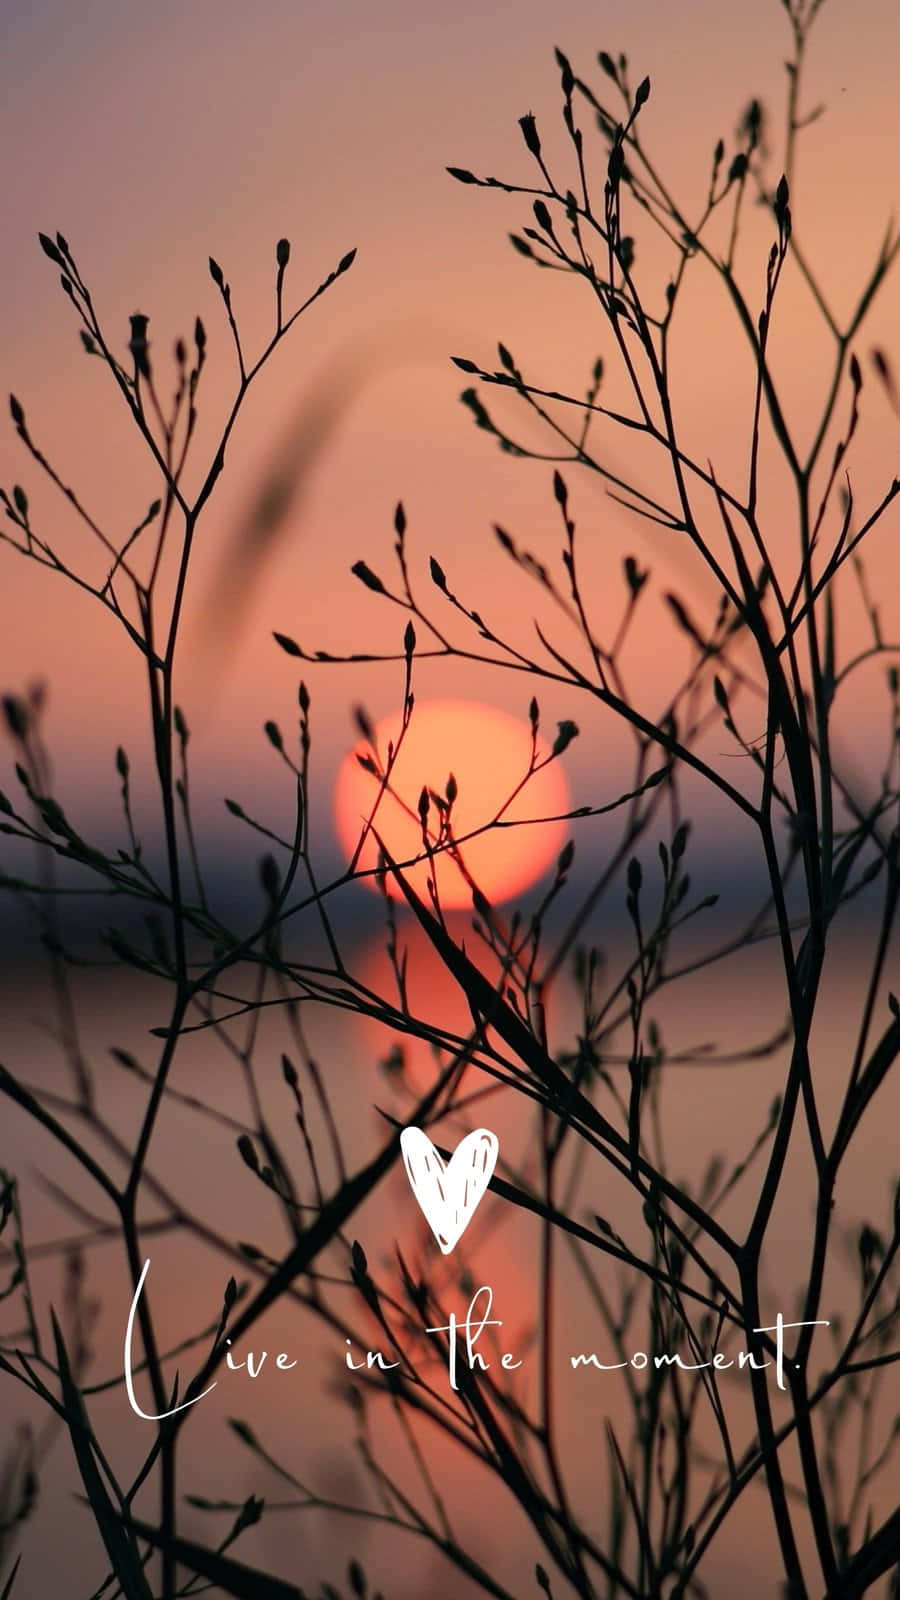 Quote With Heart And Branches On Sunset Wallpaper